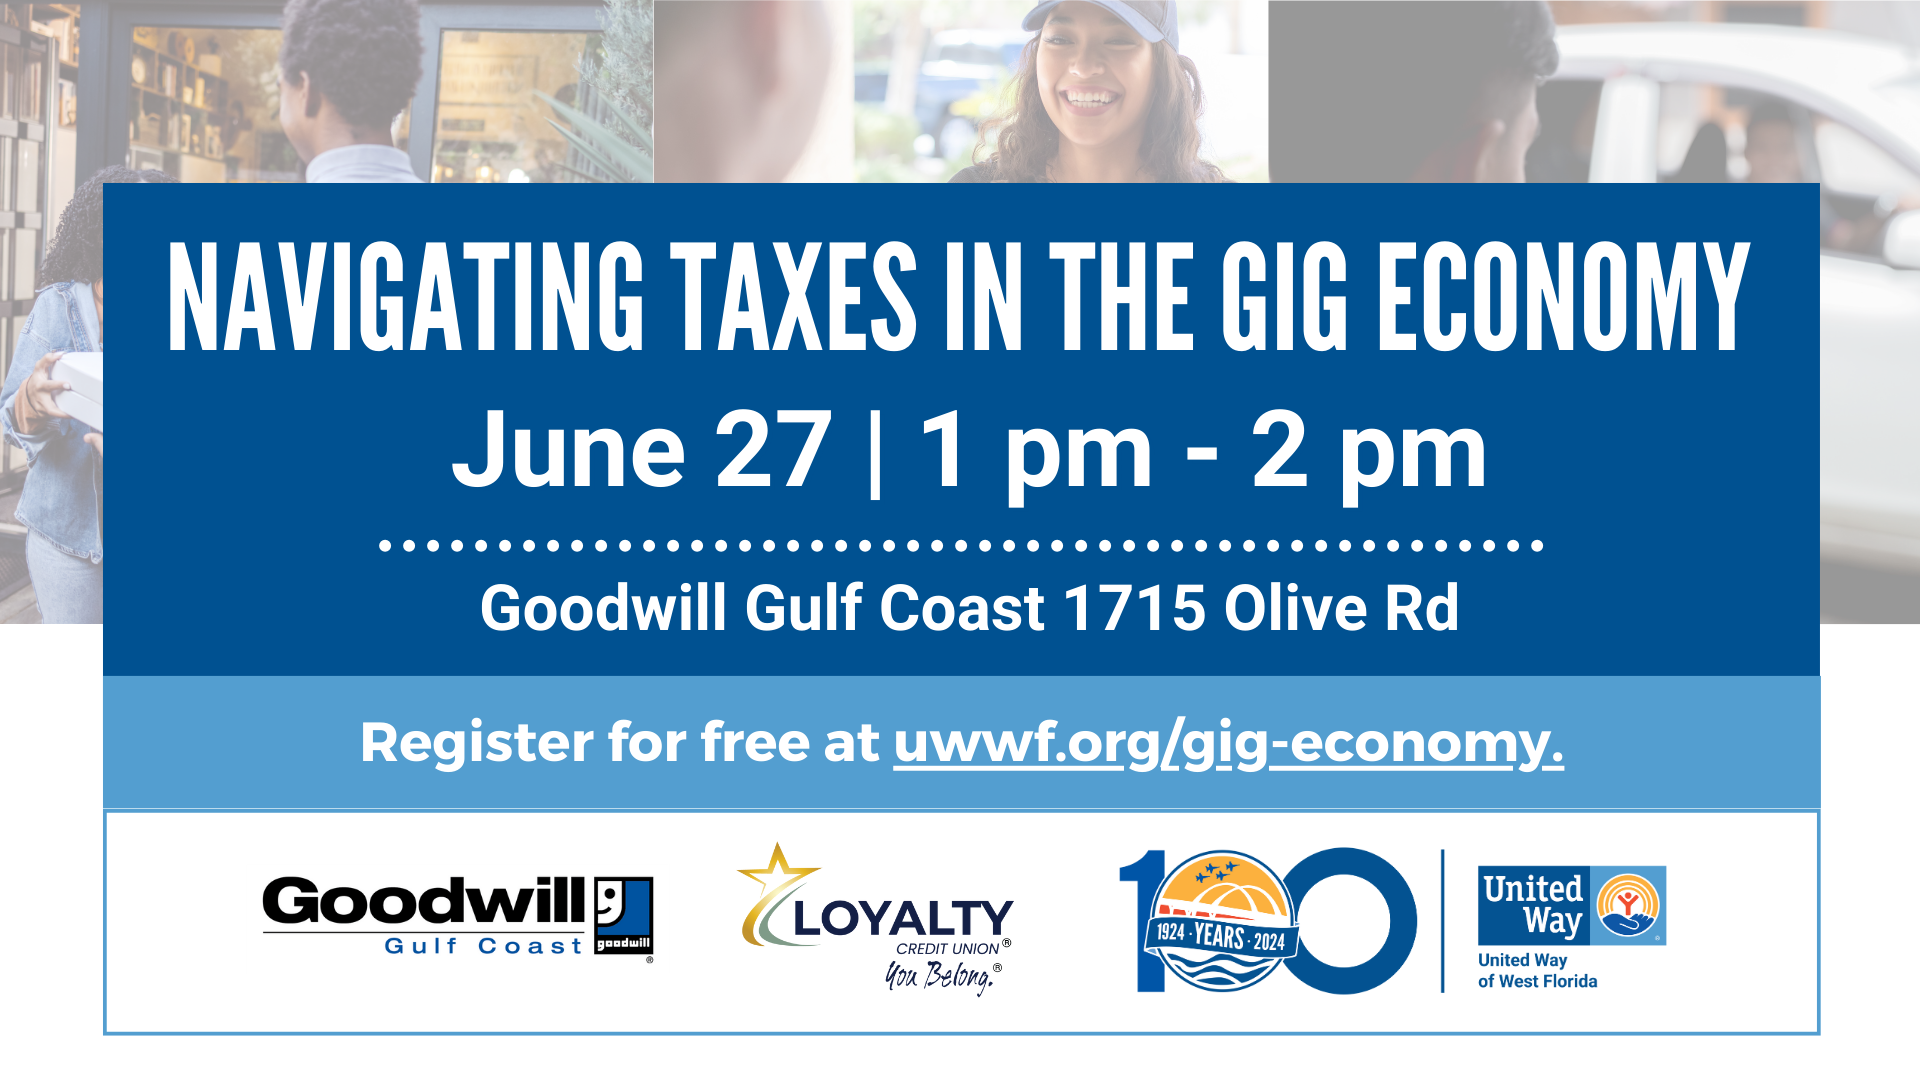 Navigating Taxes in the Gig Economy with UWWF, Loyalty Credit Union, and Goodwill Gulf Coast